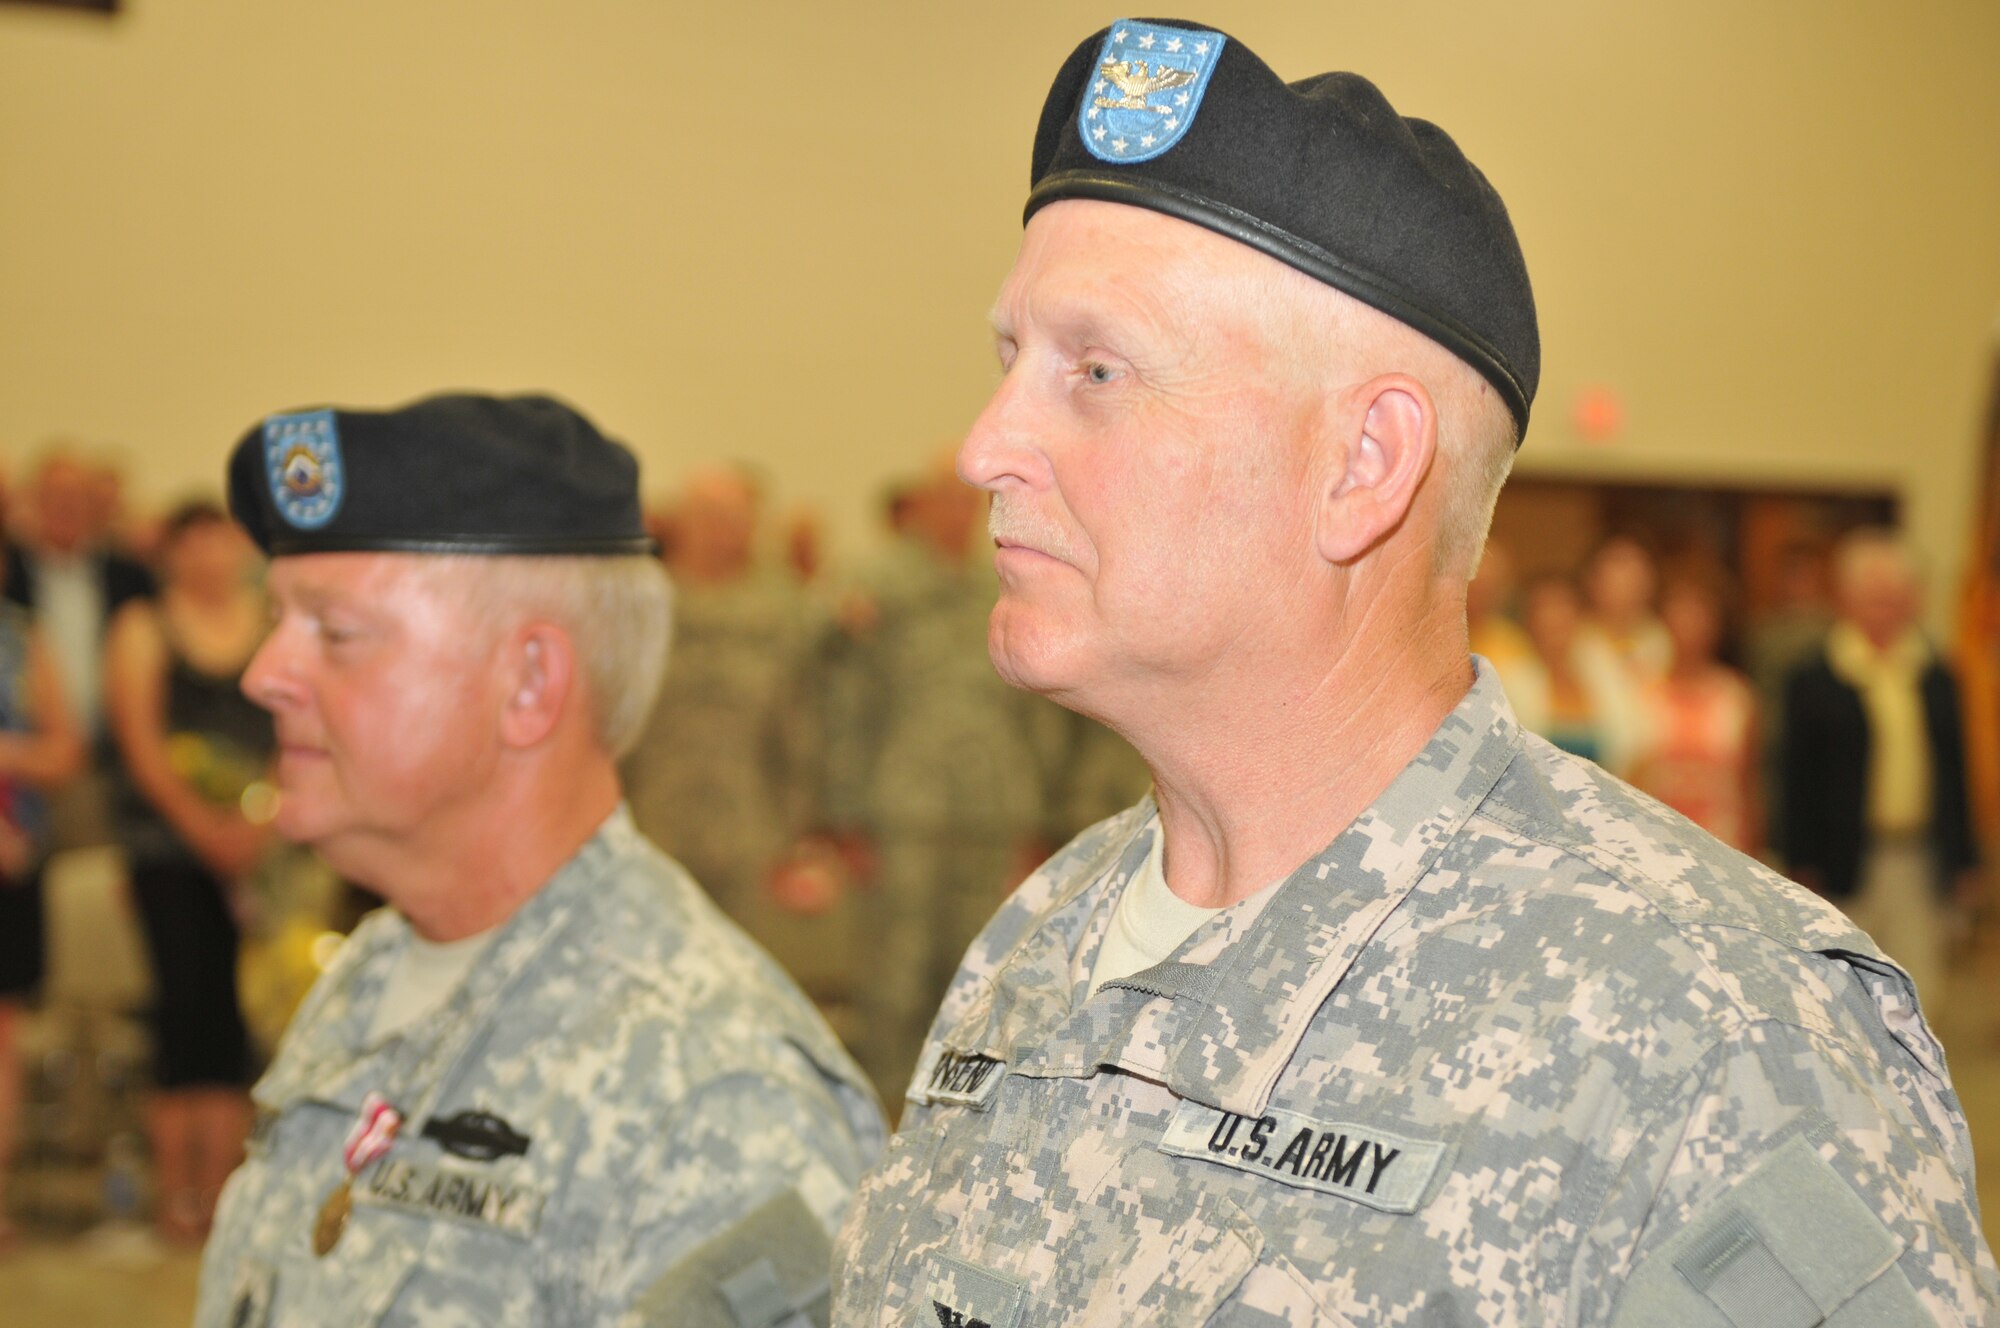 Col. Steven Bensend, right, listens to the reading of the orders awarding his Meritorious Service Medal as Command Sgt. Major Ed Hansen, already pinned with his medal, stands by his side. The medals were awarded during a change-of-command ceremony at Camp Williams July 10. Wisconsin National Guard photo by Tech. Sgt. Jon LaDue